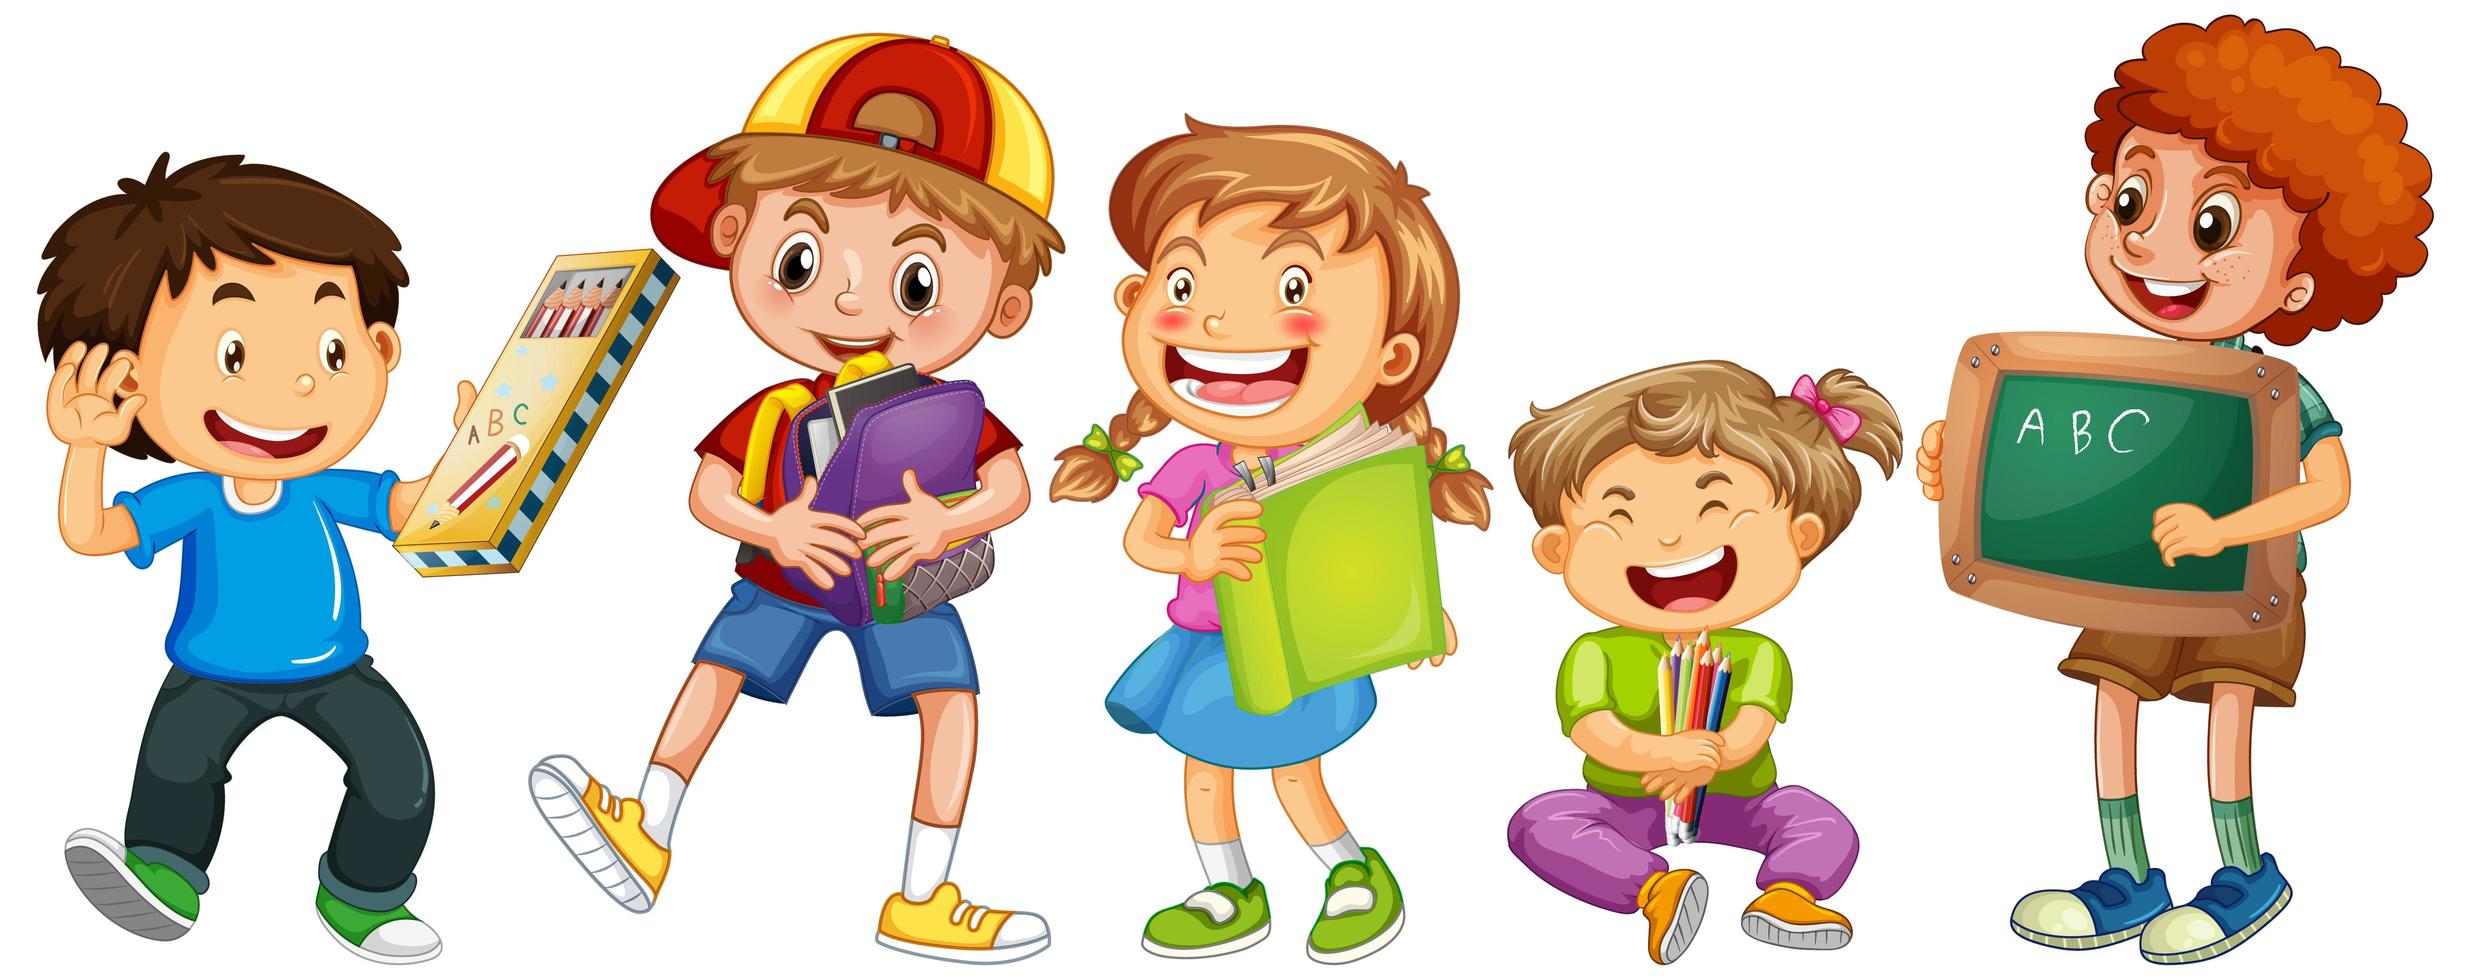 Group of young children cartoon character on white background vector